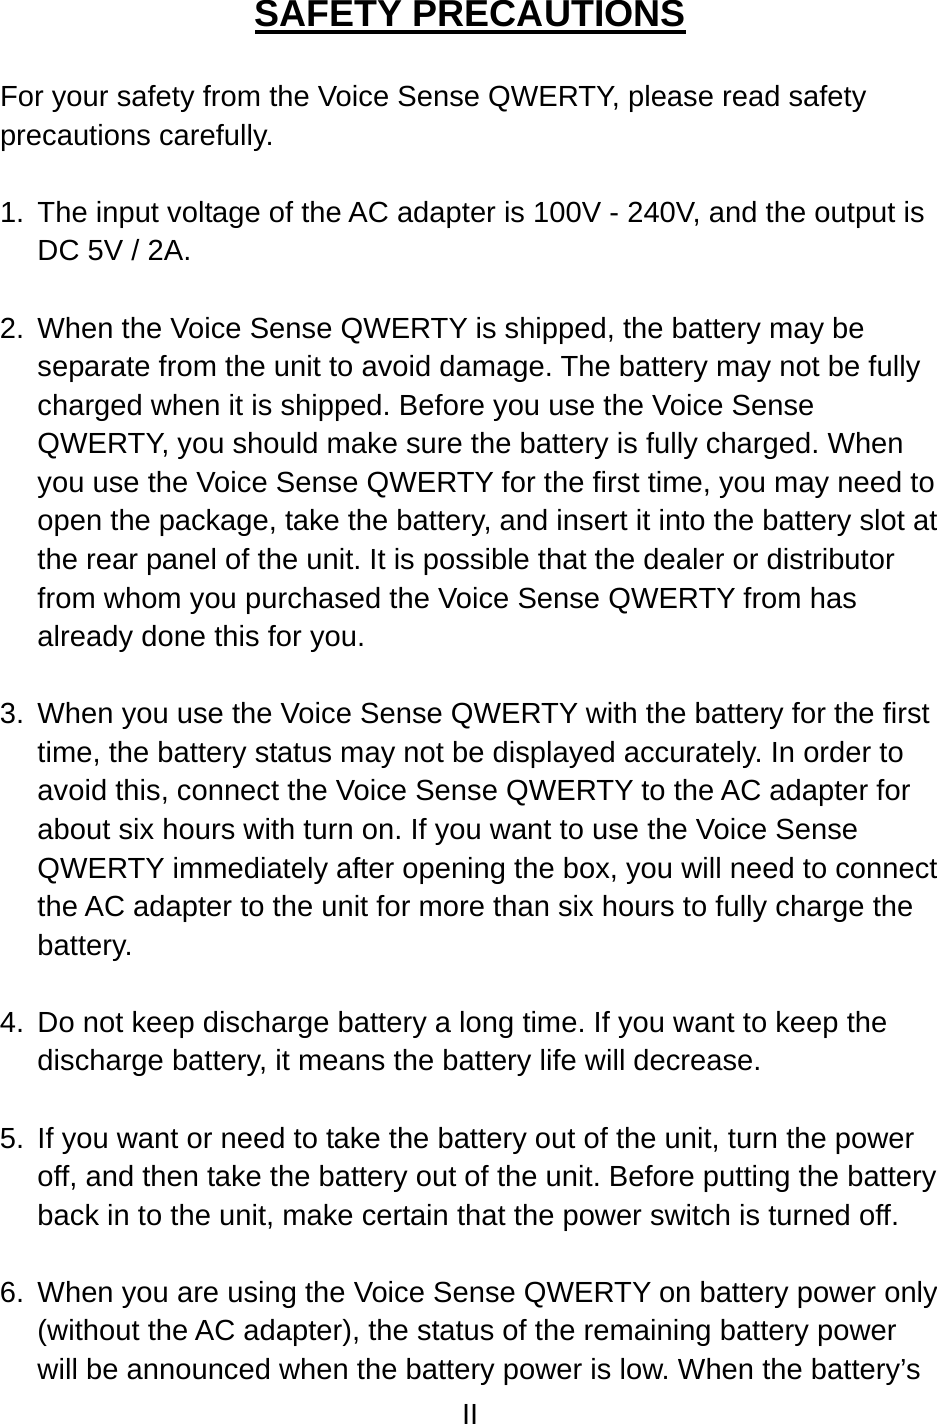 II  SAFETY PRECAUTIONS  For your safety from the Voice Sense QWERTY, please read safety precautions carefully.  1.  The input voltage of the AC adapter is 100V - 240V, and the output is DC 5V / 2A.  2.  When the Voice Sense QWERTY is shipped, the battery may be separate from the unit to avoid damage. The battery may not be fully charged when it is shipped. Before you use the Voice Sense QWERTY, you should make sure the battery is fully charged. When you use the Voice Sense QWERTY for the first time, you may need to open the package, take the battery, and insert it into the battery slot at the rear panel of the unit. It is possible that the dealer or distributor from whom you purchased the Voice Sense QWERTY from has already done this for you.  3.  When you use the Voice Sense QWERTY with the battery for the first time, the battery status may not be displayed accurately. In order to avoid this, connect the Voice Sense QWERTY to the AC adapter for about six hours with turn on. If you want to use the Voice Sense QWERTY immediately after opening the box, you will need to connect the AC adapter to the unit for more than six hours to fully charge the battery.  4.  Do not keep discharge battery a long time. If you want to keep the discharge battery, it means the battery life will decrease.  5.  If you want or need to take the battery out of the unit, turn the power off, and then take the battery out of the unit. Before putting the battery back in to the unit, make certain that the power switch is turned off.  6.  When you are using the Voice Sense QWERTY on battery power only (without the AC adapter), the status of the remaining battery power will be announced when the battery power is low. When the battery’s 